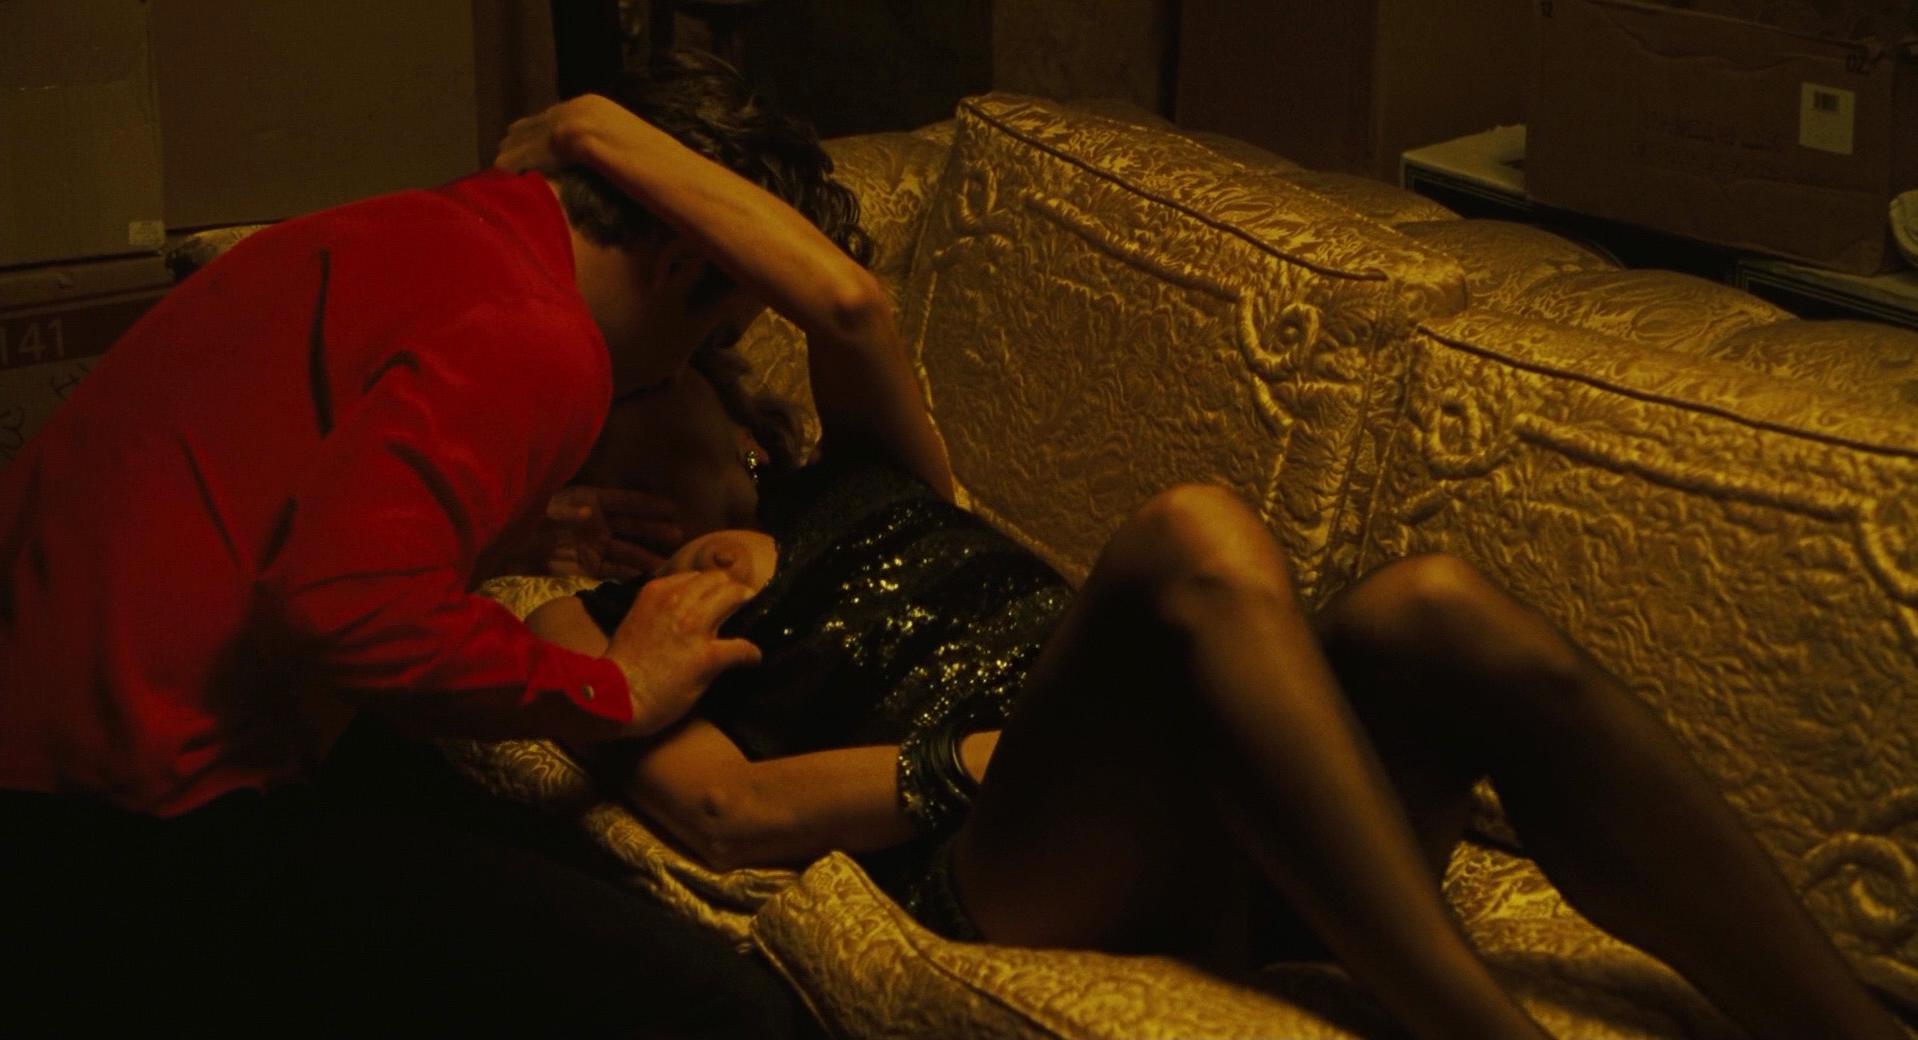 Eva Mendes in nude scene from We Own the Night which was released in 2007. 